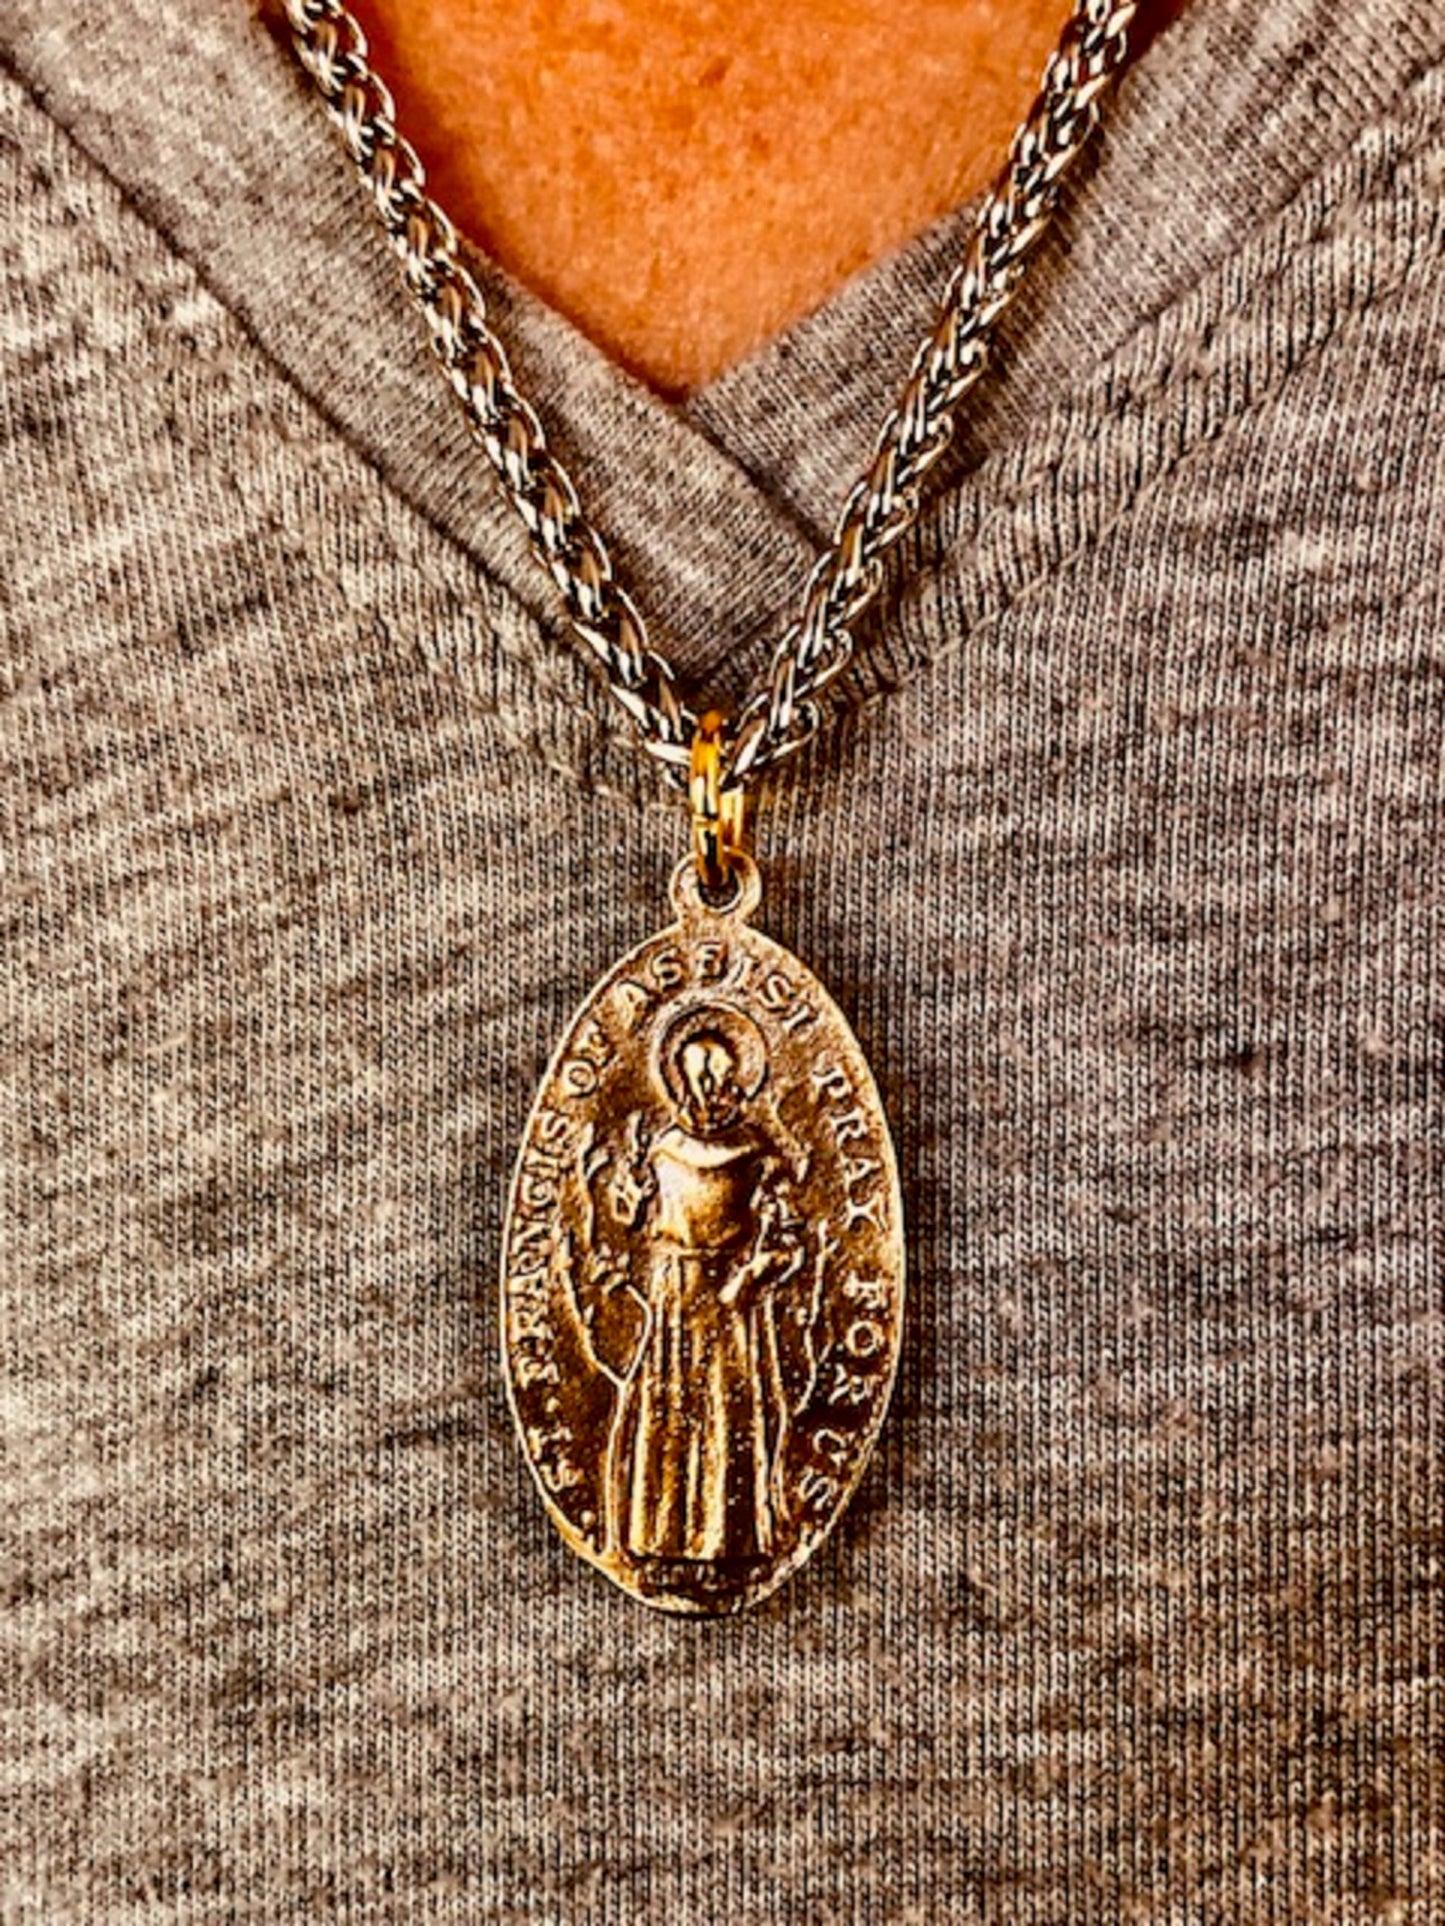 St. Francis of Assisi Wax Seal Antique Bronze Pendant– Patron Saint of Animals and the Environment -Antique Wax Seal- Charm Fascinations 124